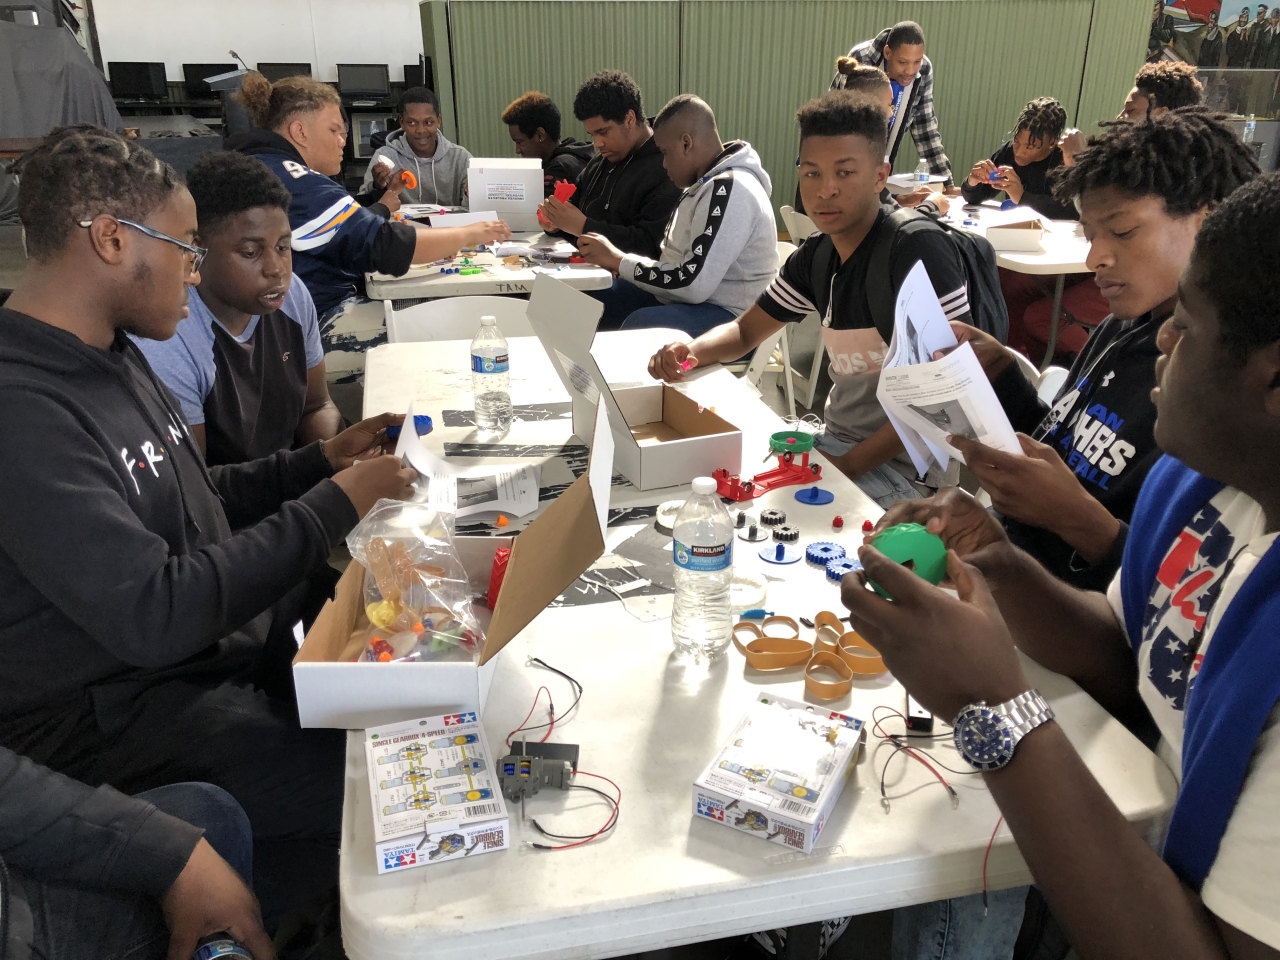 Students sit at a table assembling pieces of electronic equipment